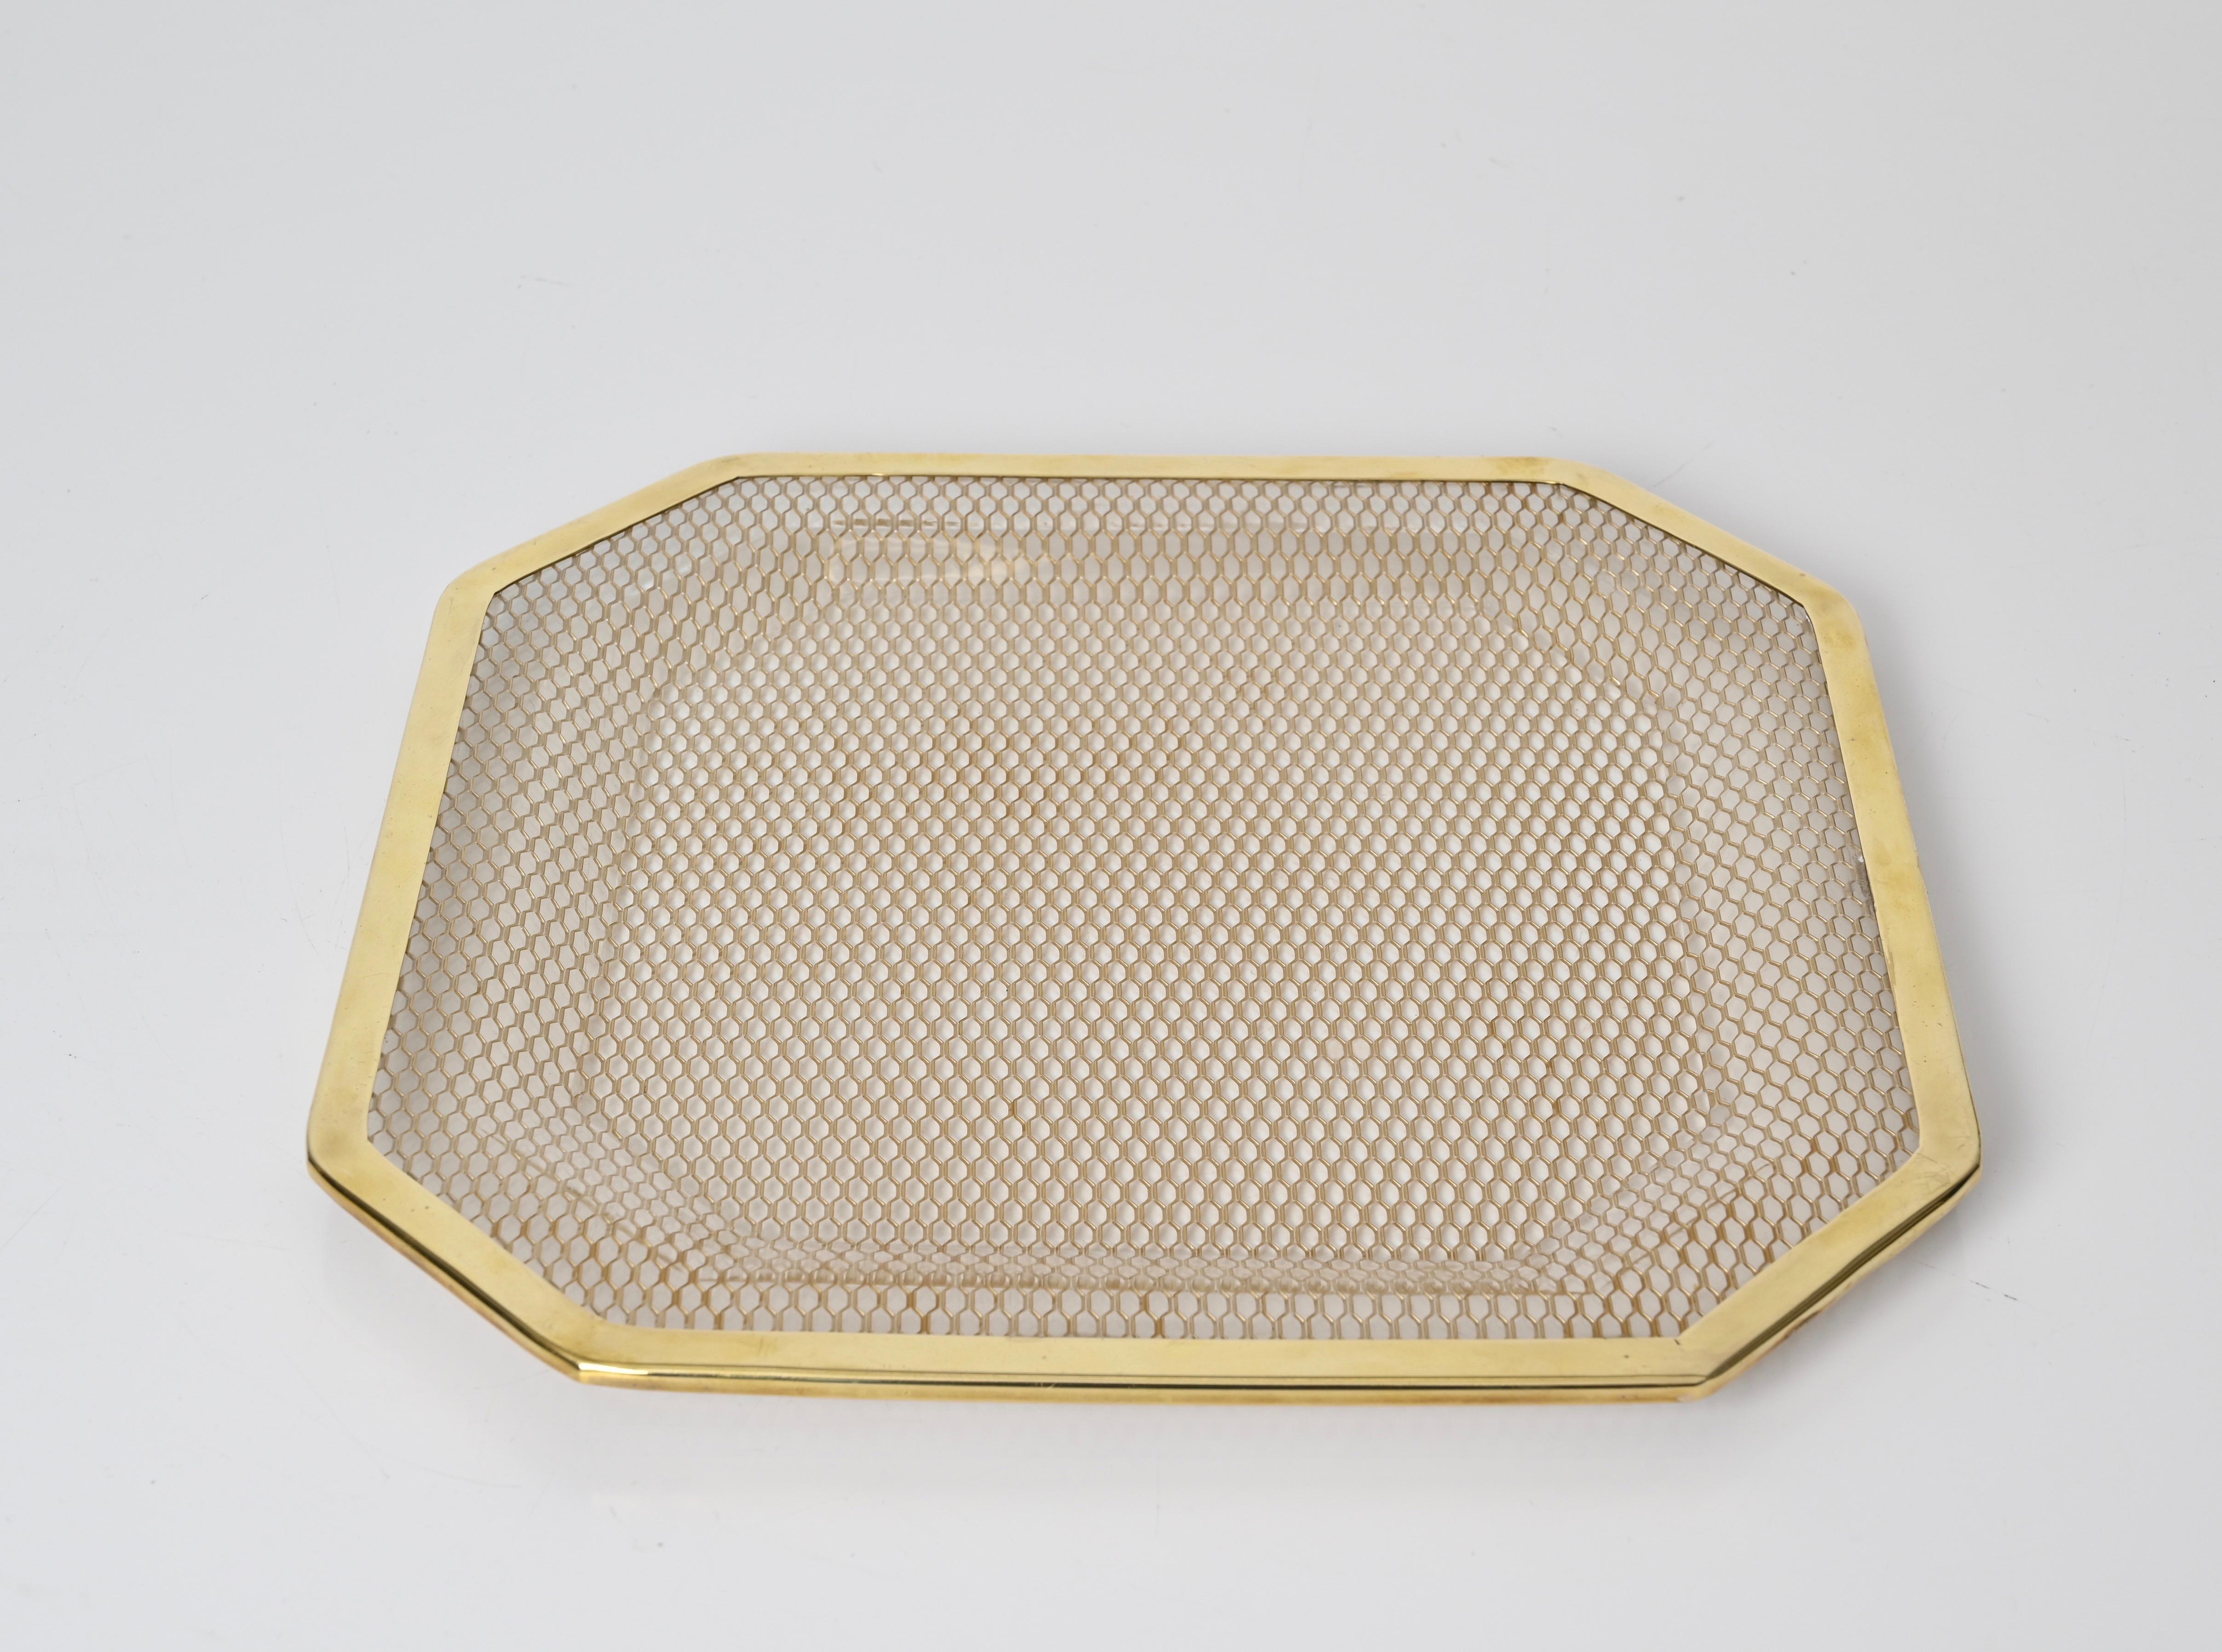 Midcentury Lucite and Brass Octagonal Italian Tray, Willy Rizzo Style, 1970s For Sale 8